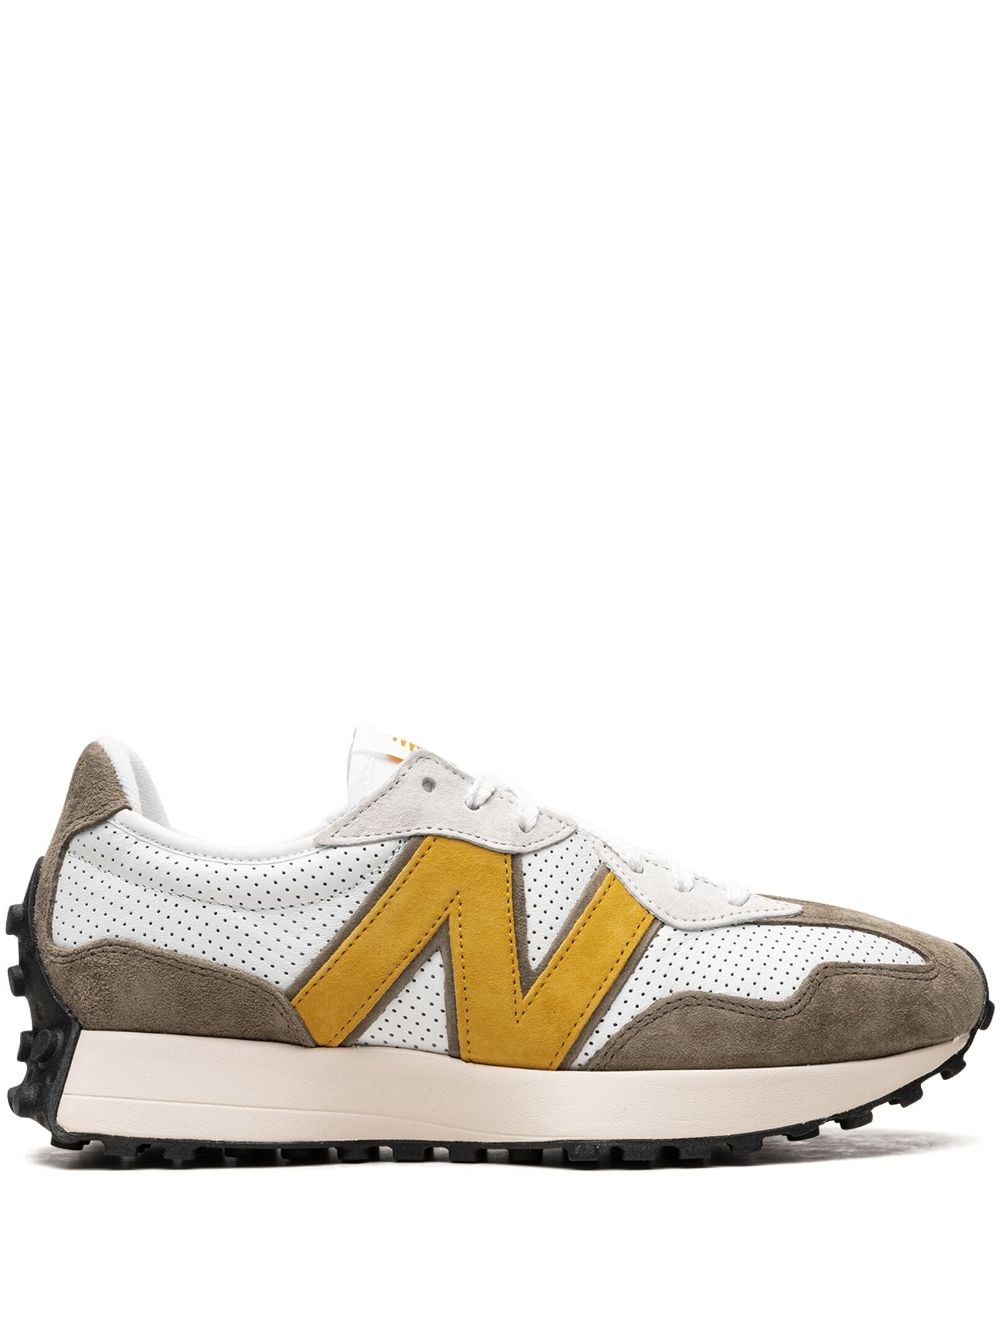 New Balance 327 "Yellow Olive" sneakers - White